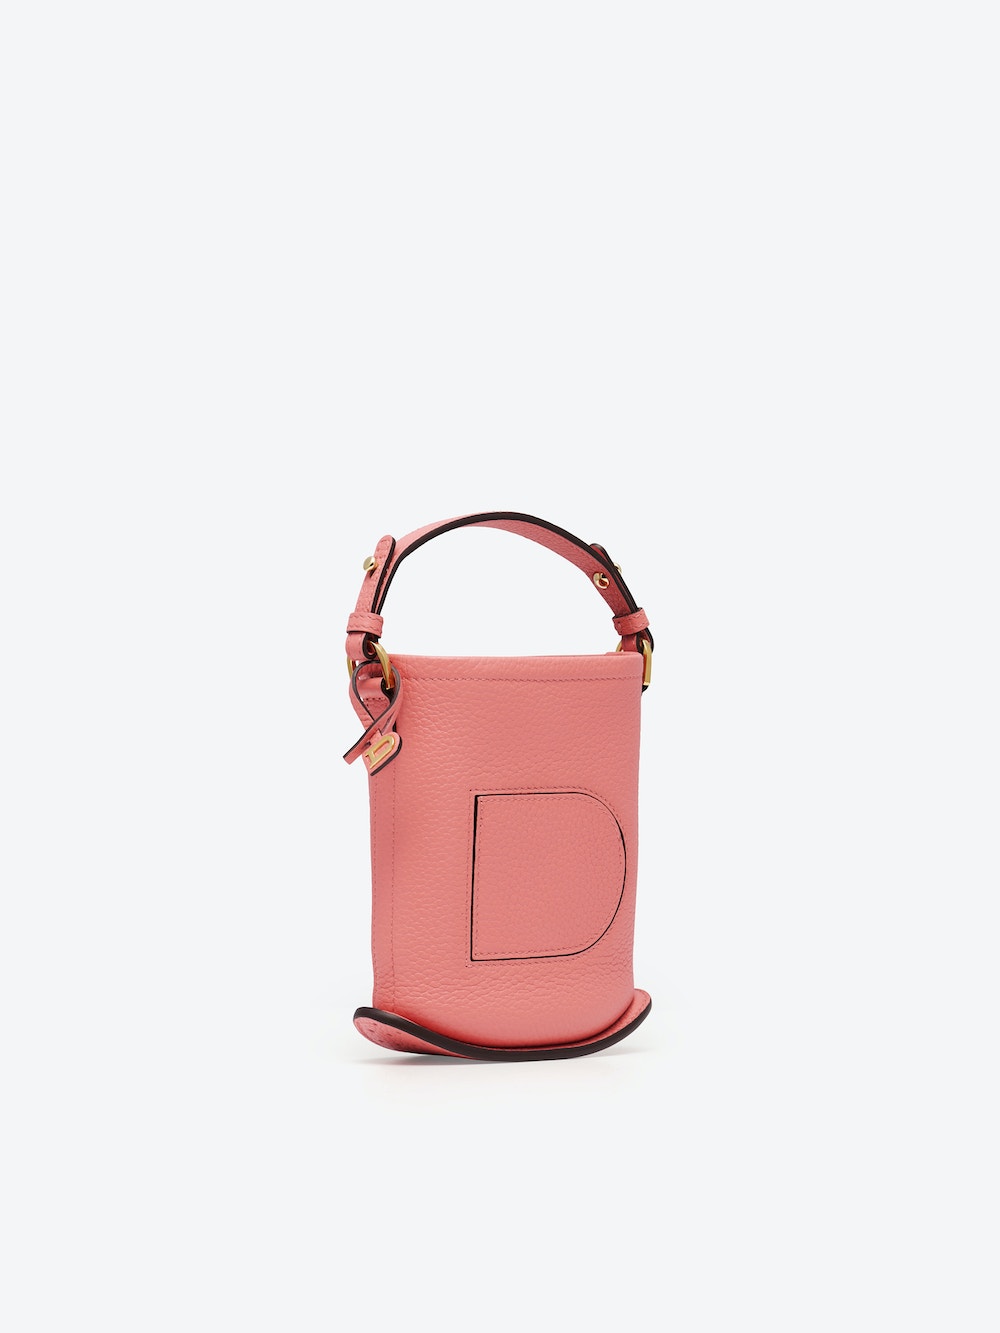 Delvaux Pin Toy in Taurillon Soft (Hibiscus)